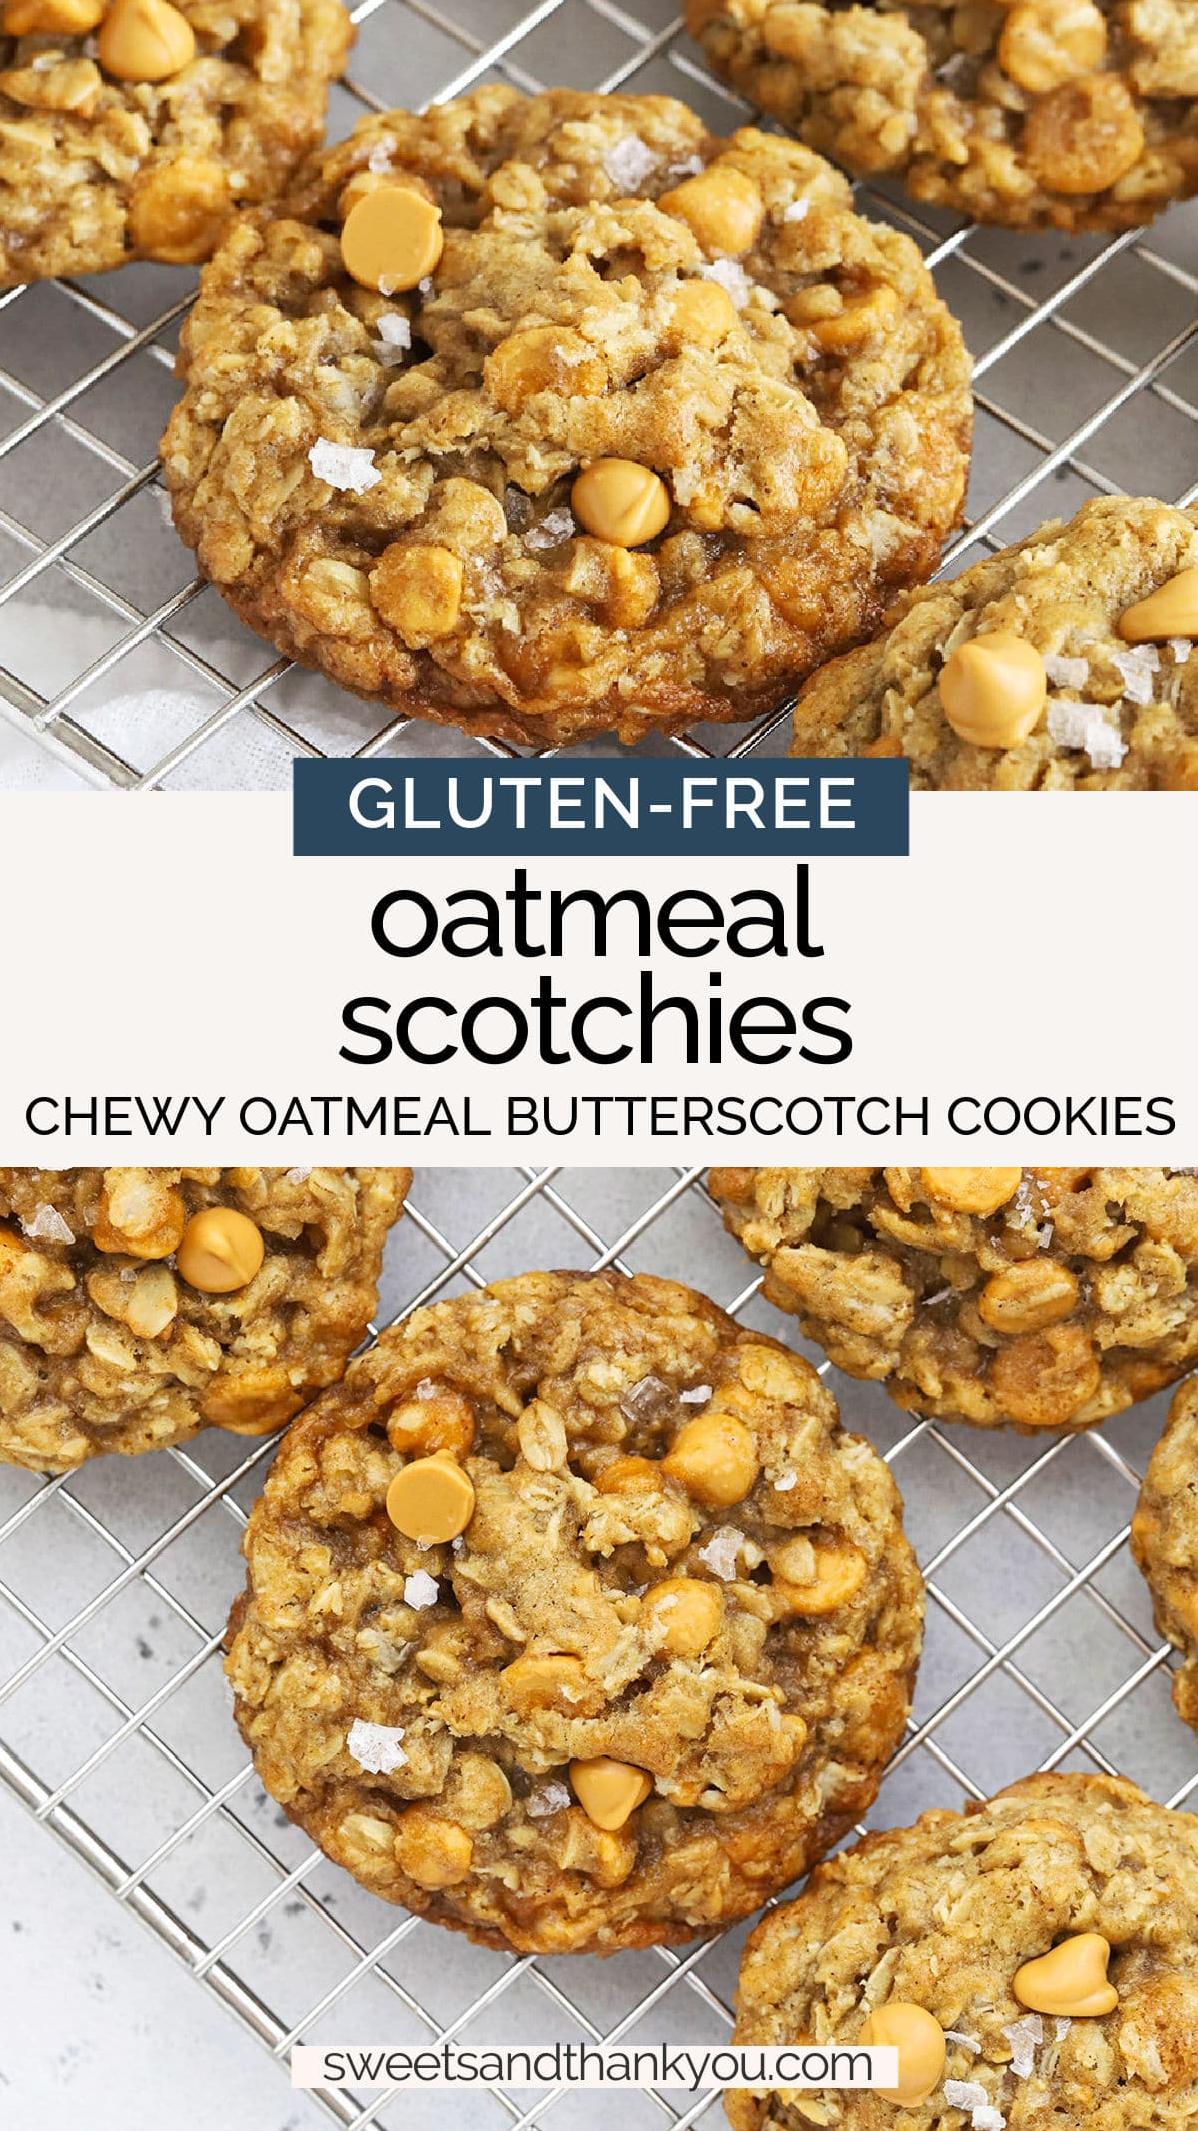  Cookies that melt in your mouth and gluten-free? Yes, please!